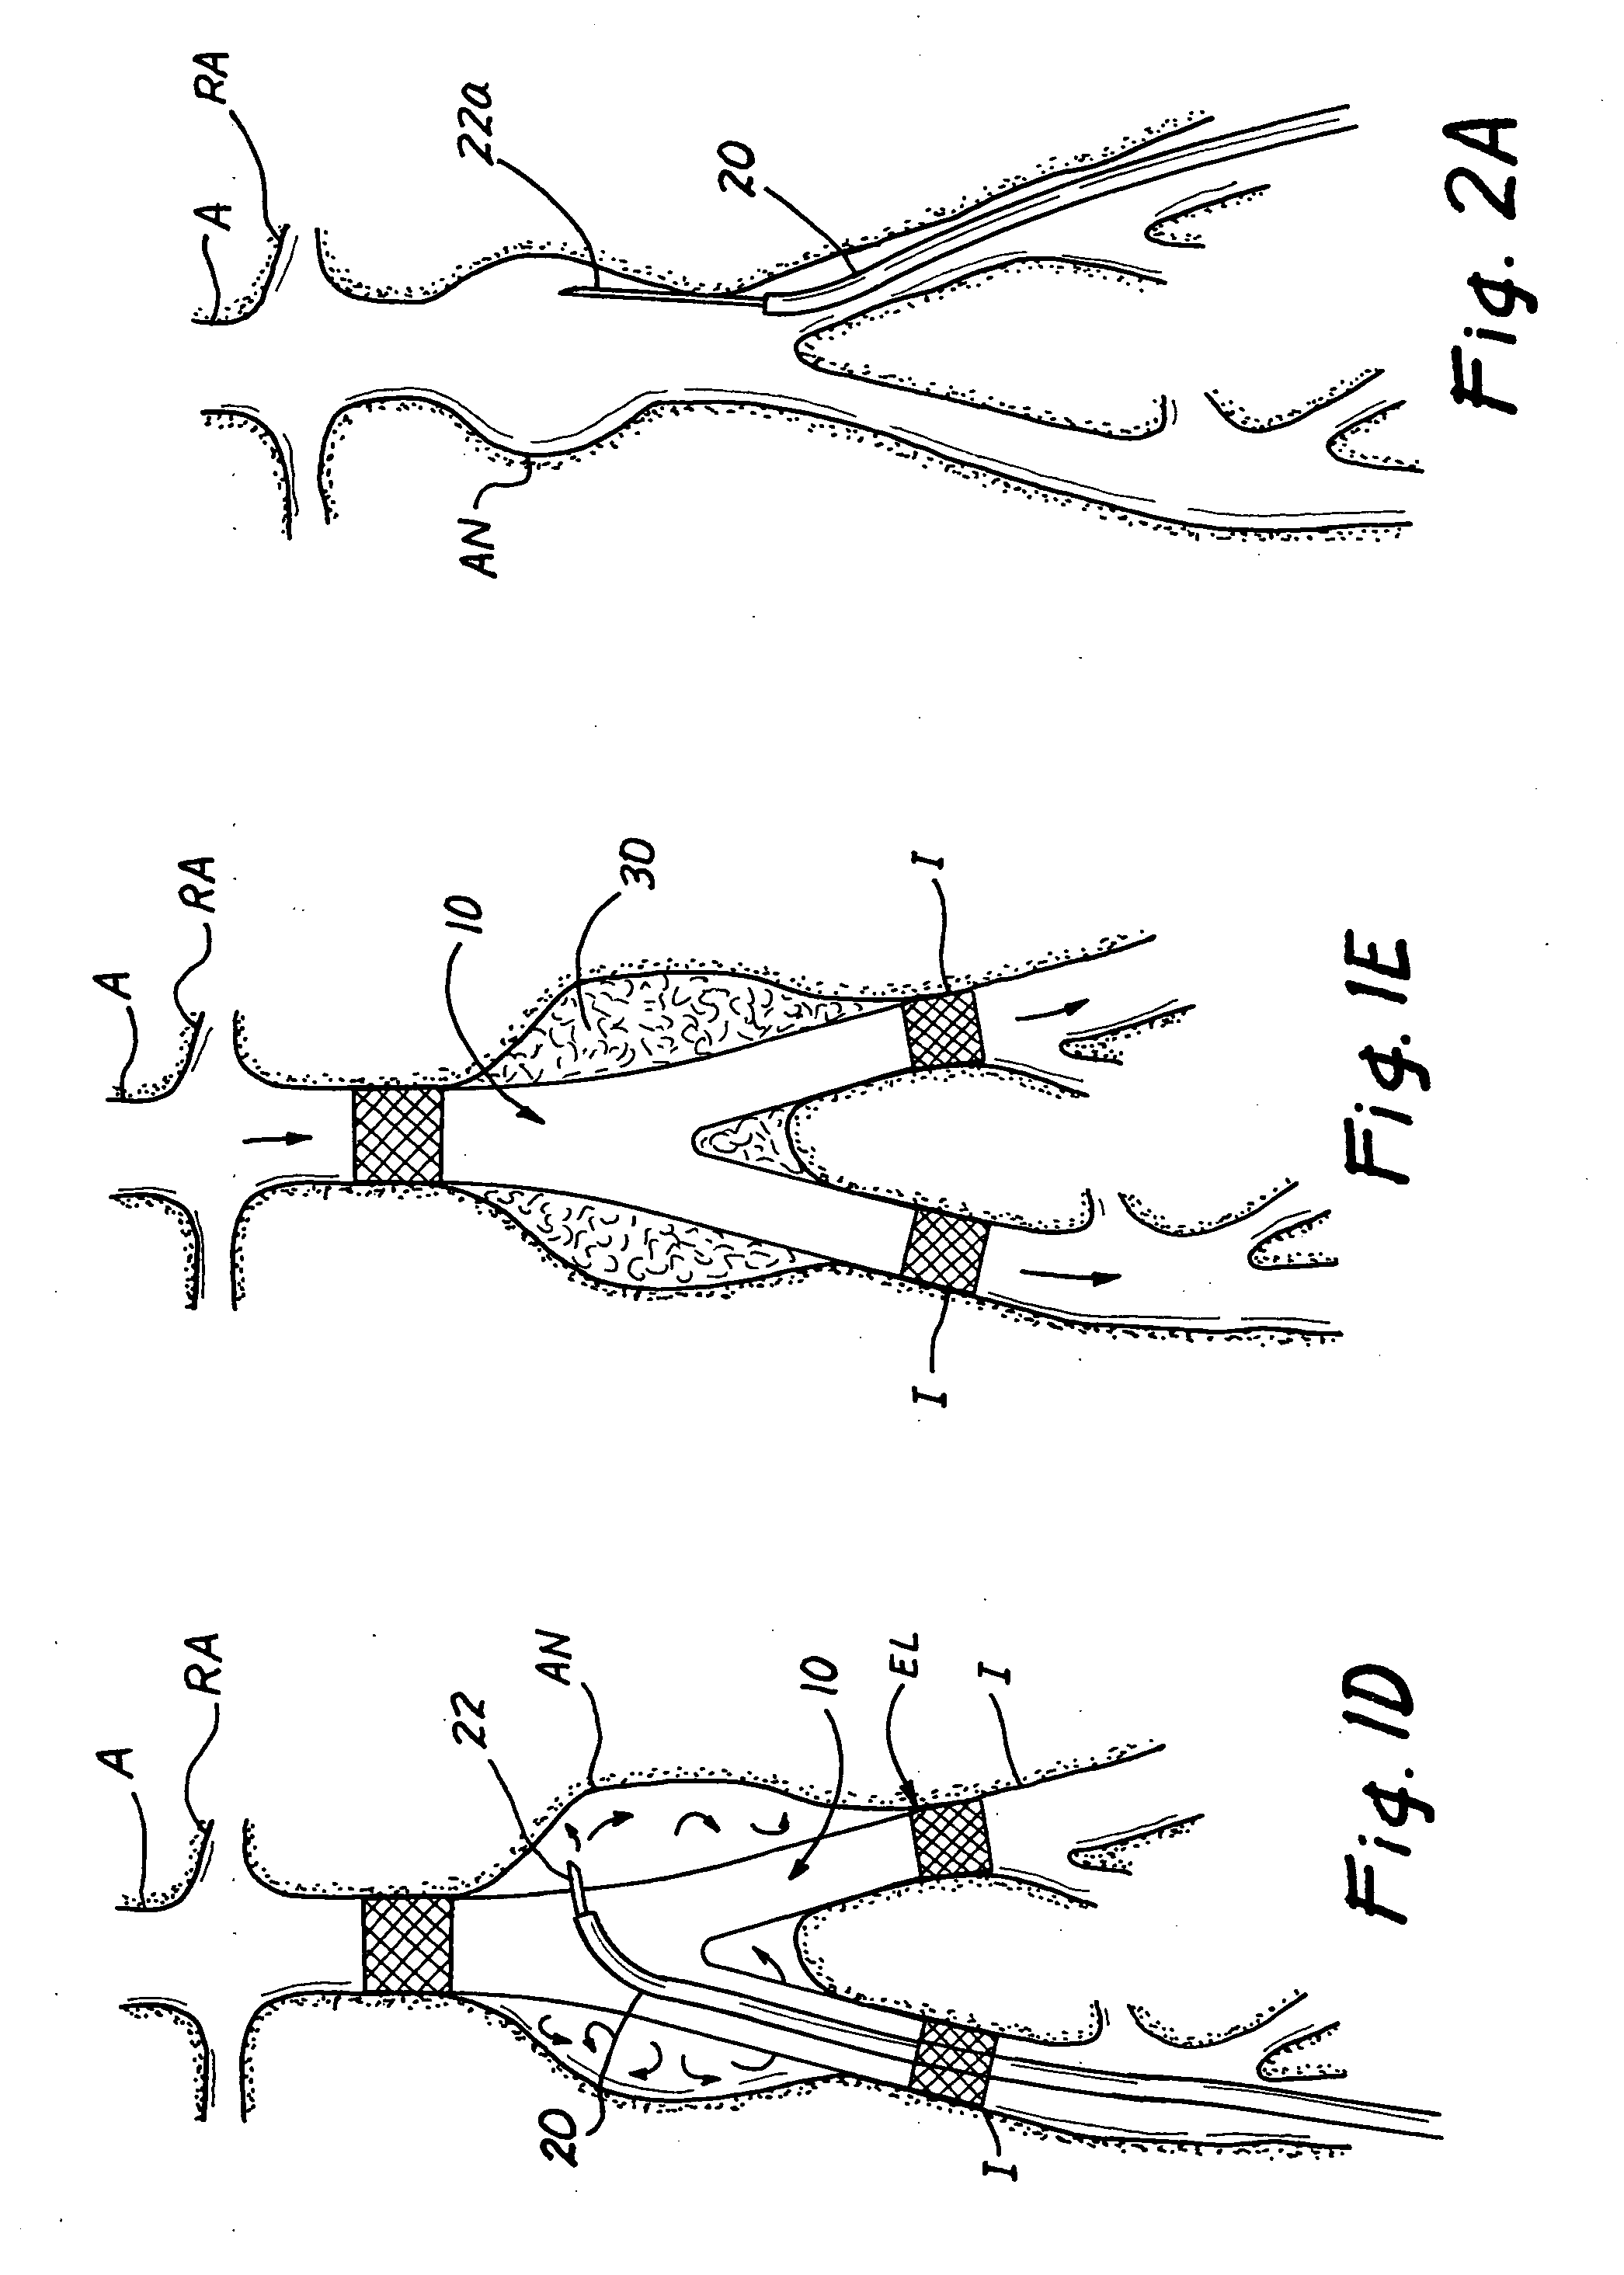 Methods, materials and apparatus for deterring or preventing endoleaks following endovascular graft implantation